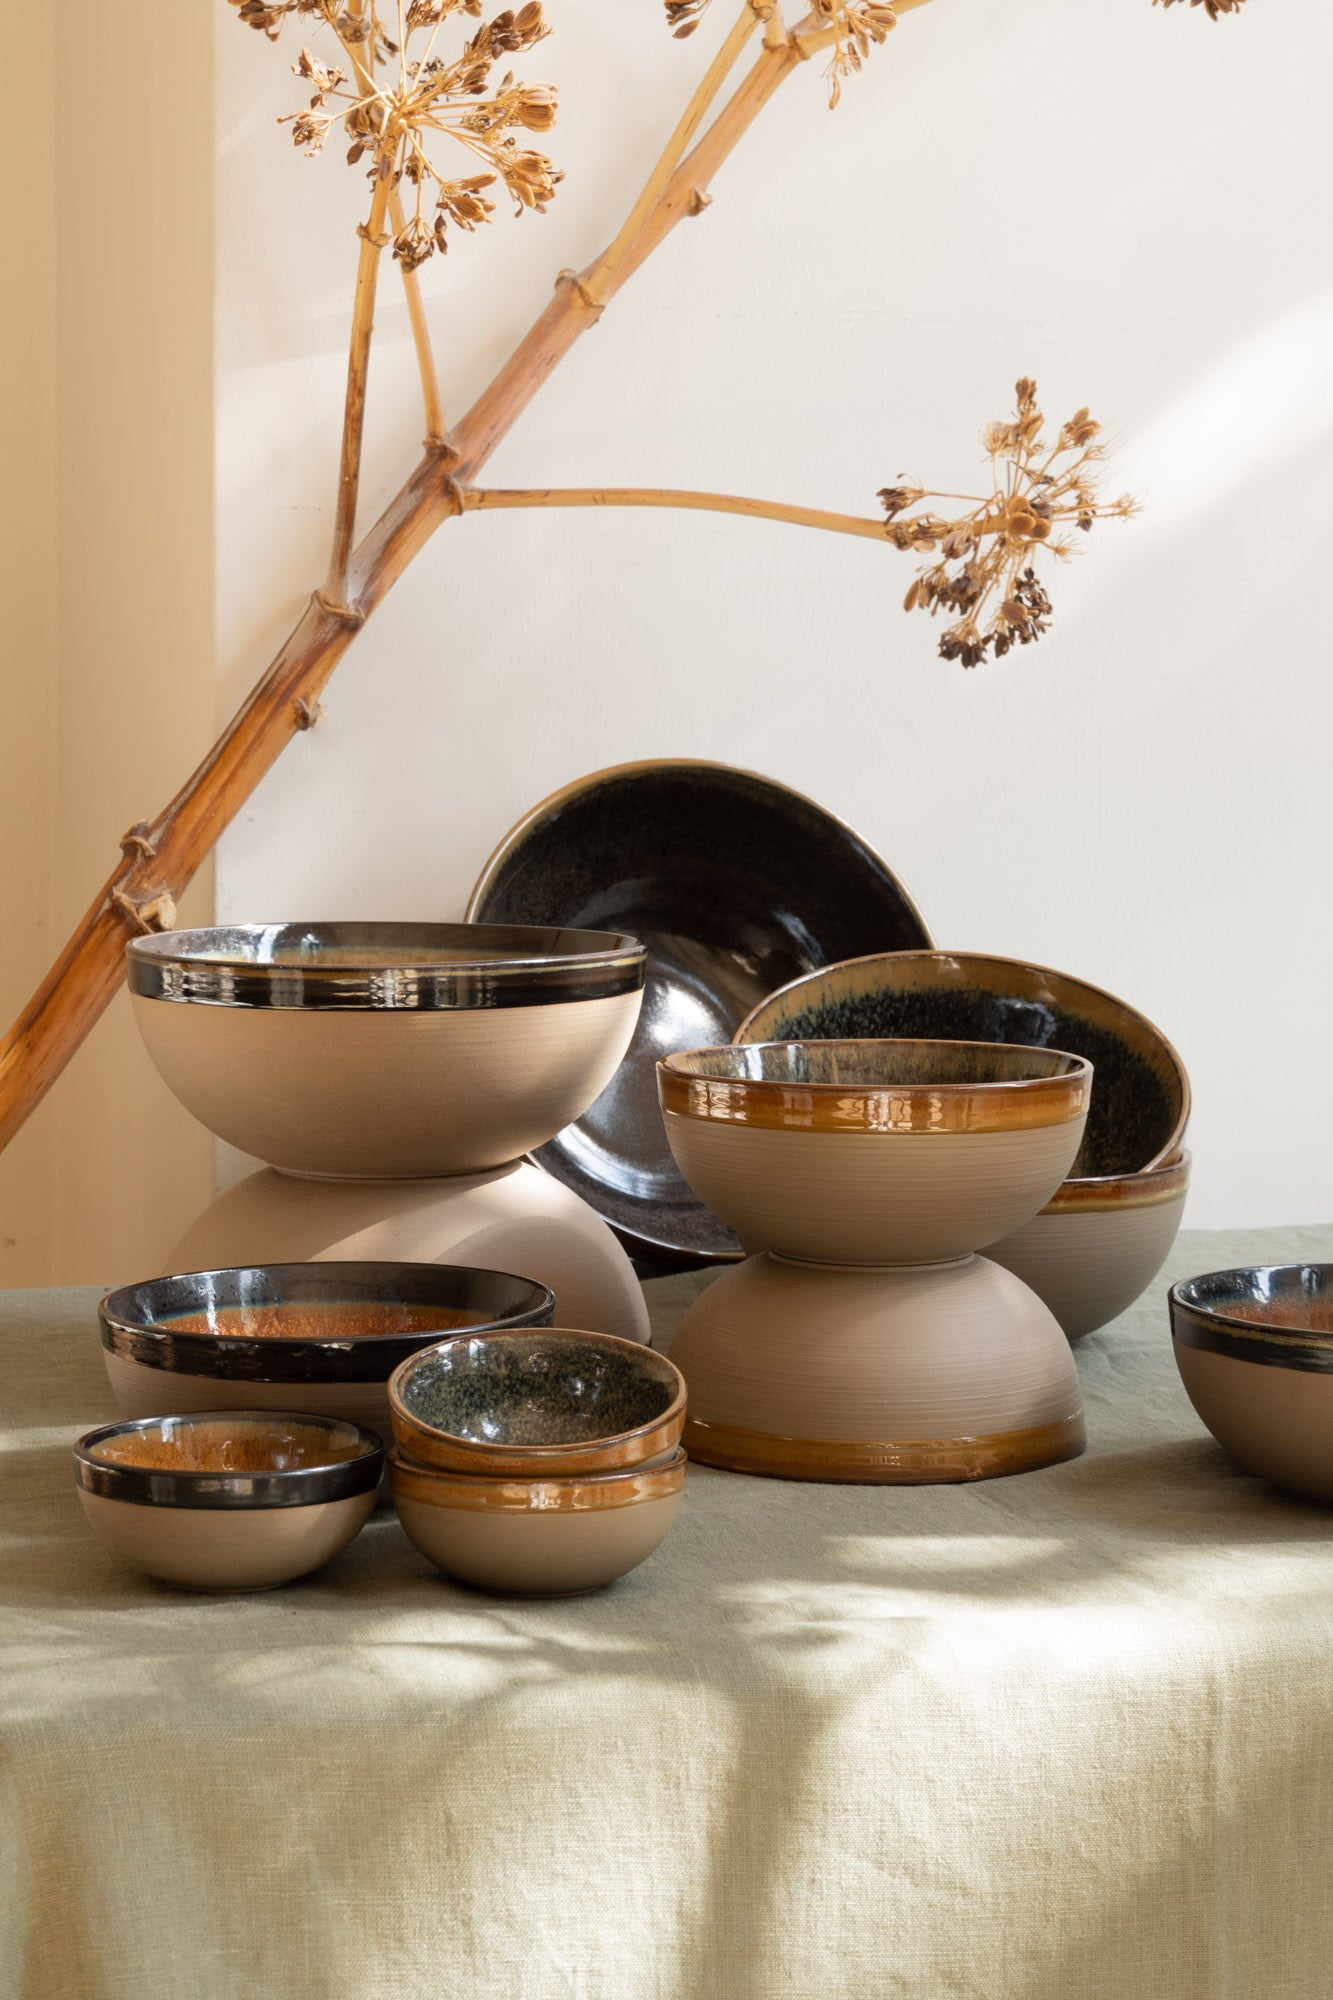 Surface Ceramic Brown bowl by Sergio Herman for serax setting on table green linnen tablecloth